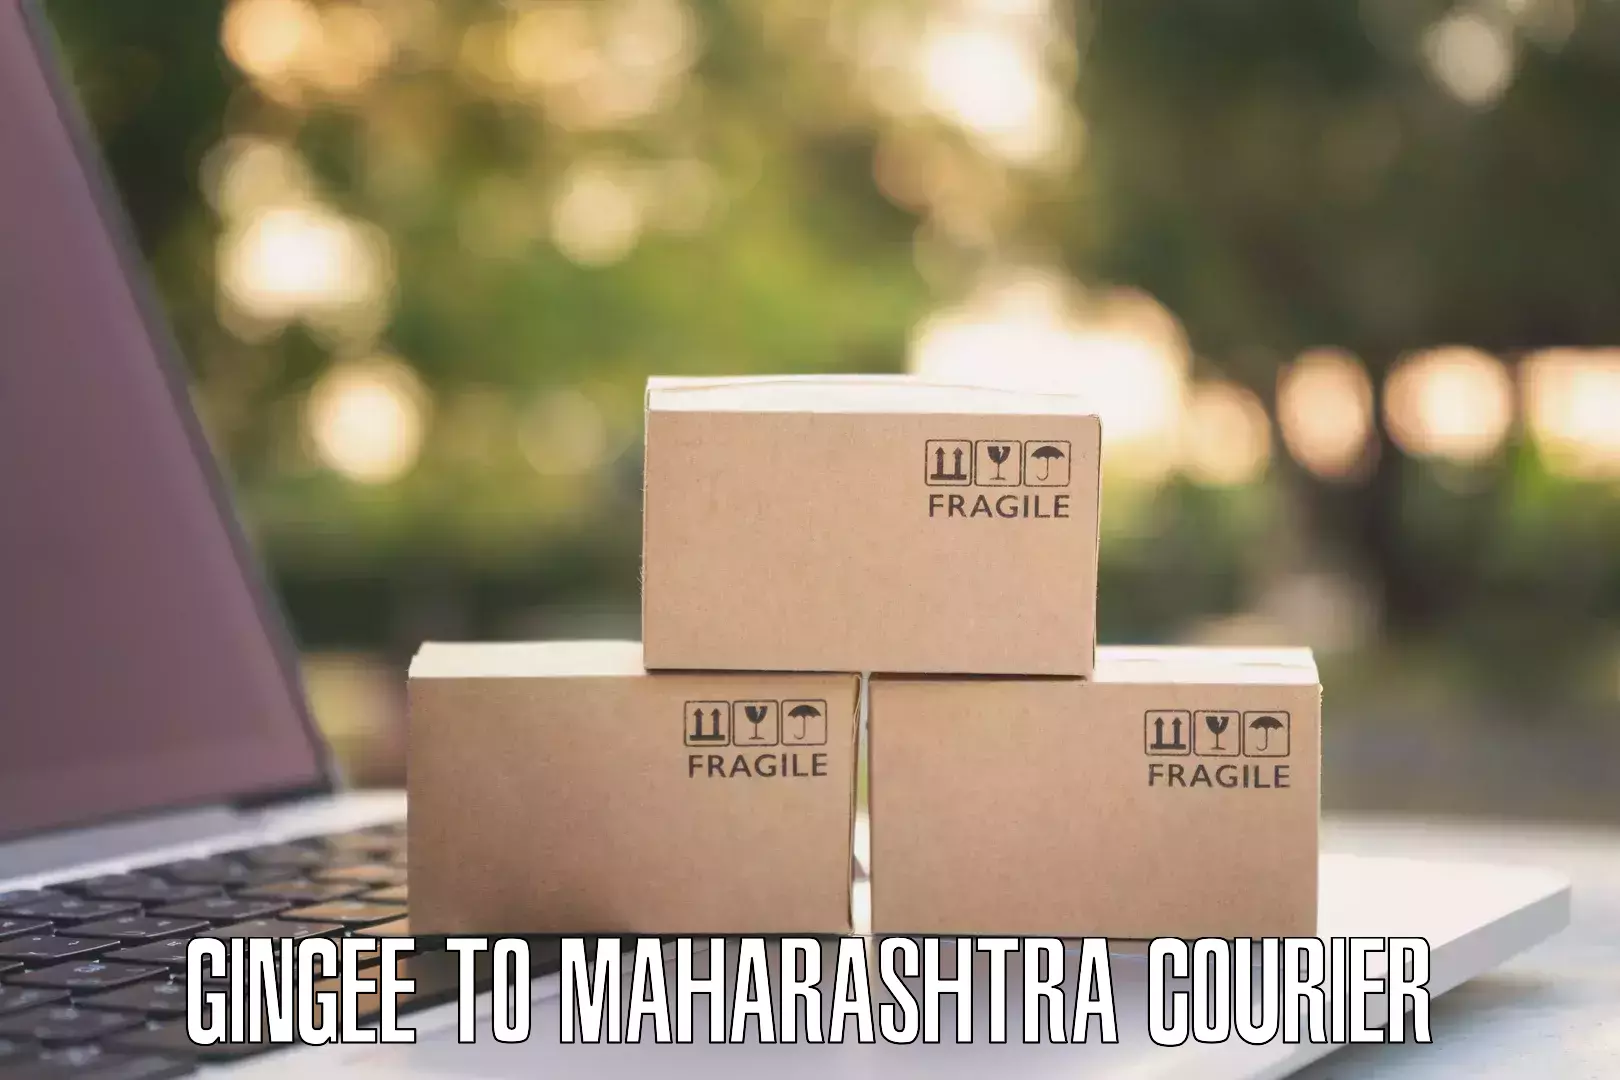 Quality courier services Gingee to Maharashtra